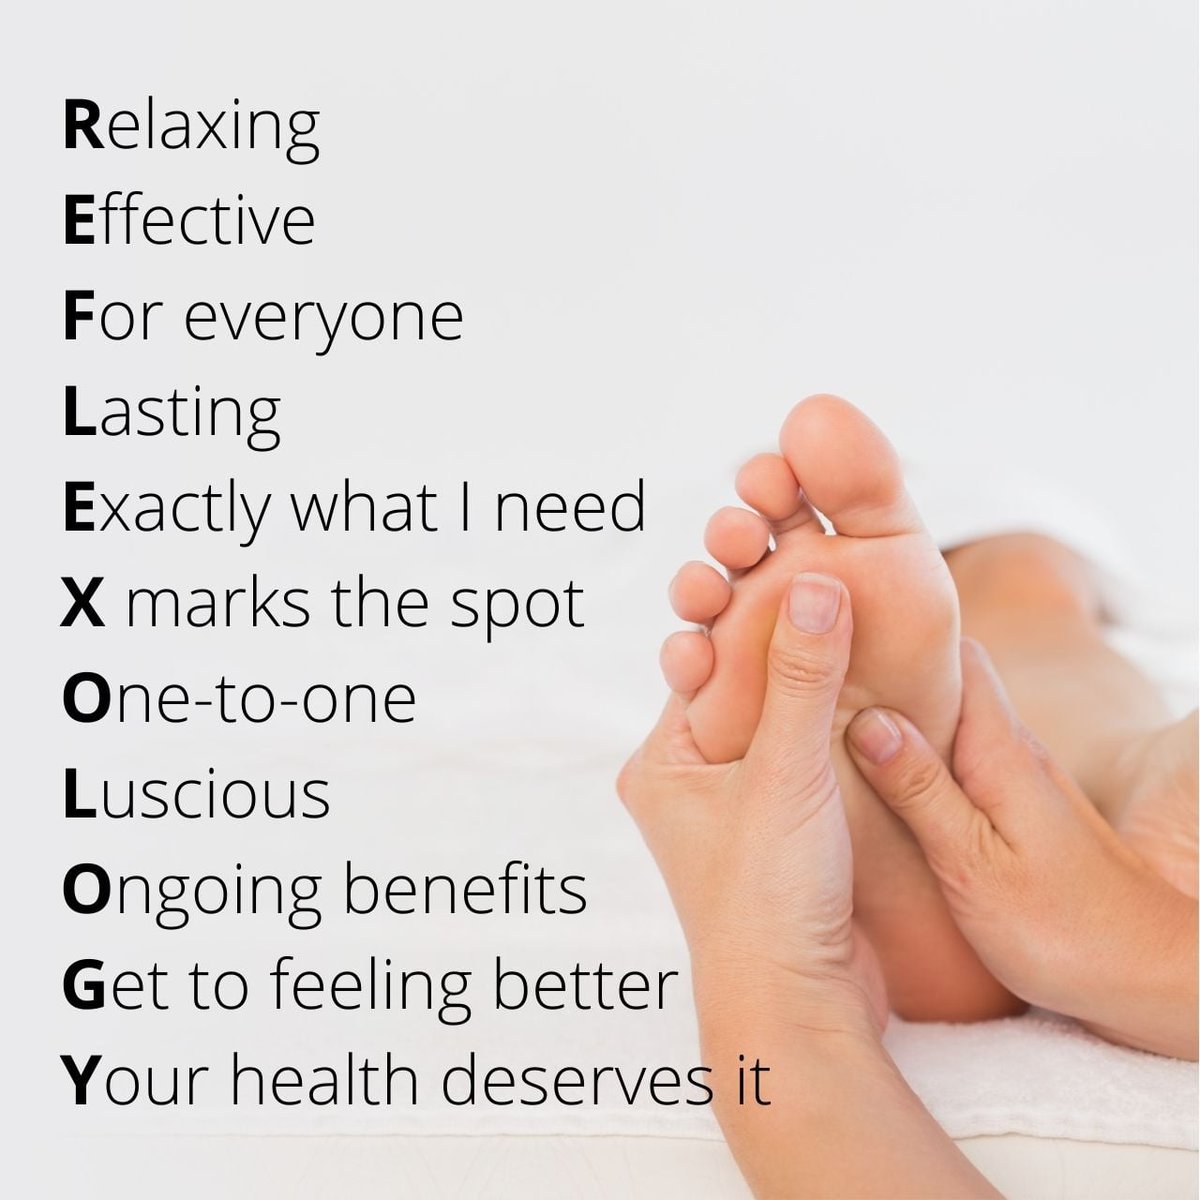 Wellness For Your Feet – Why We Recommend Making Self-Massage Part Of Your  Daily Routine